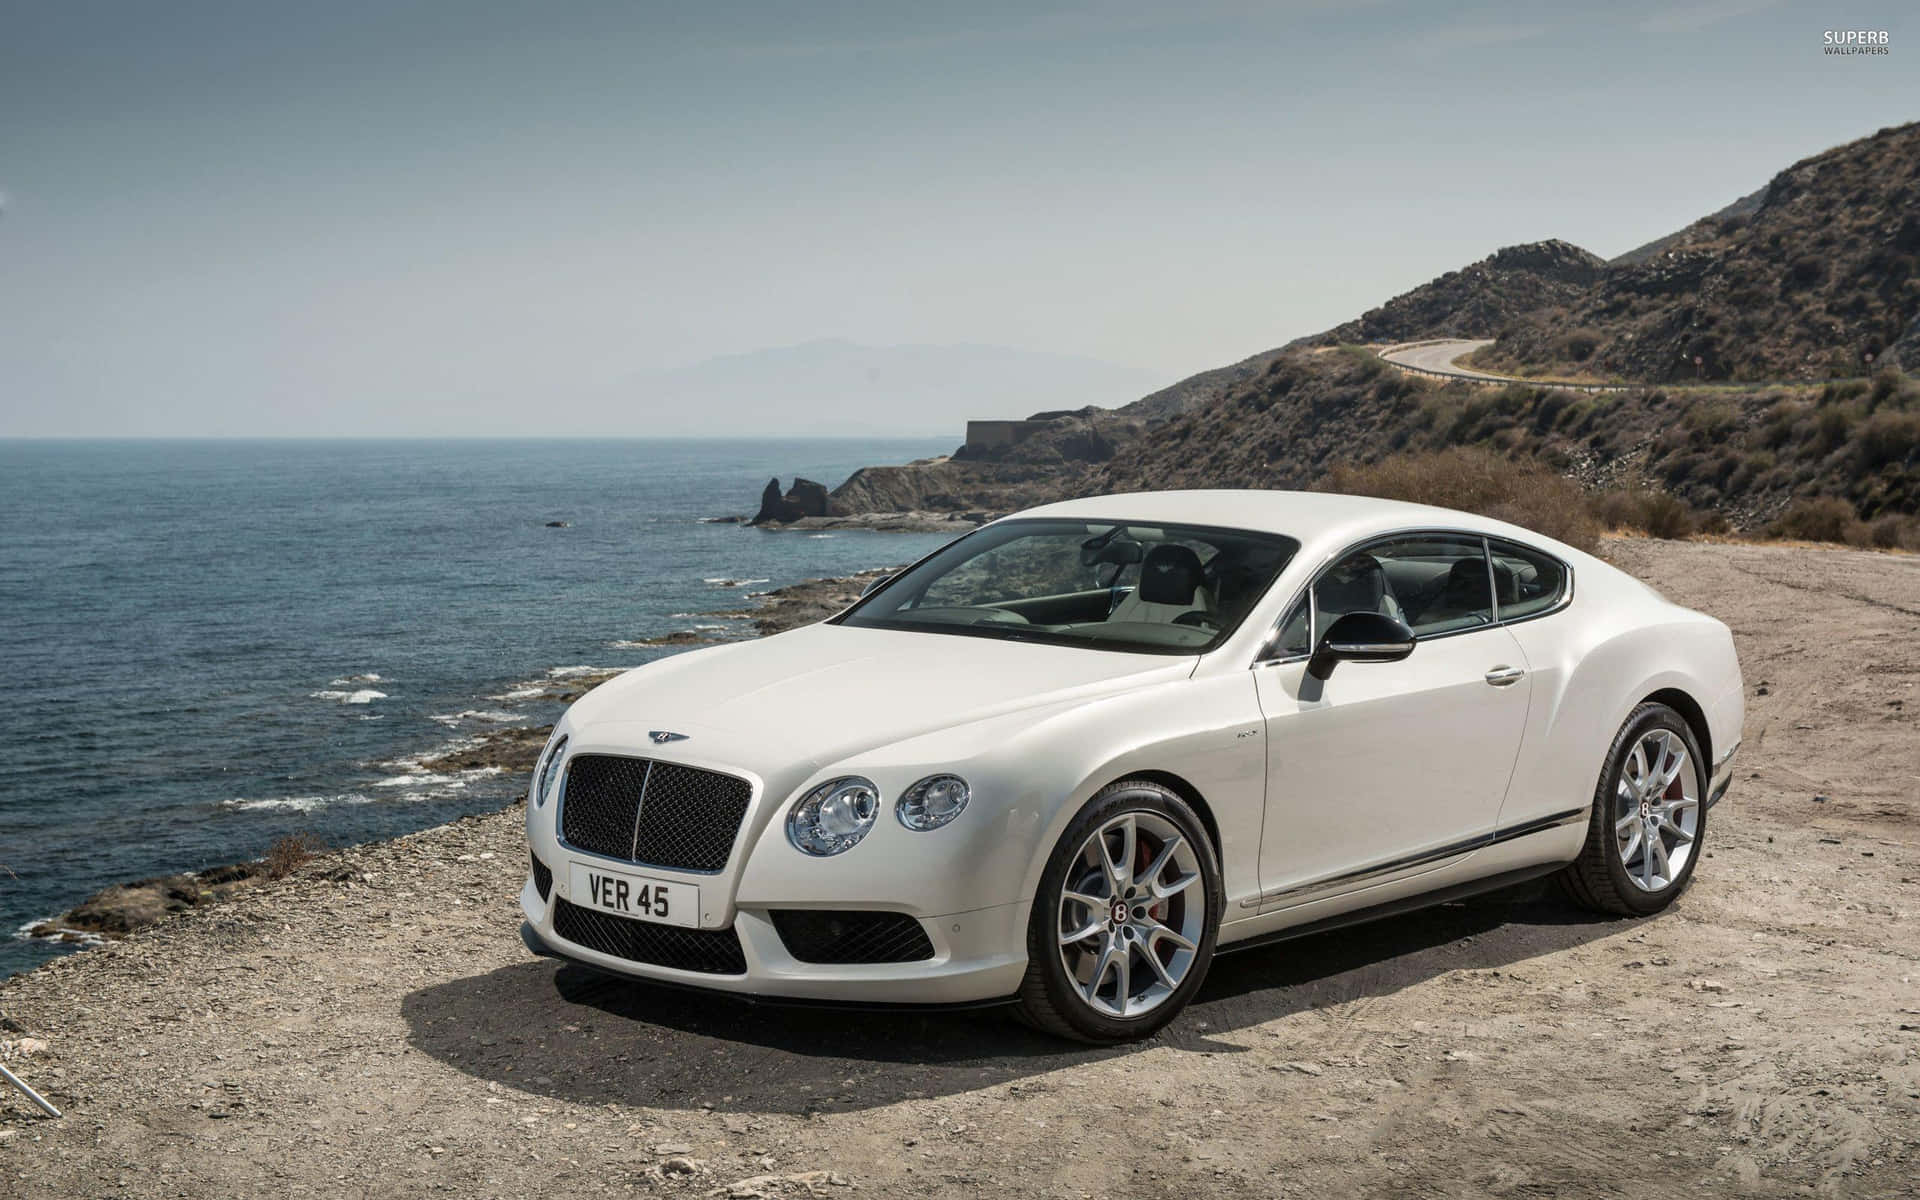 Explore in Style with a Bentley